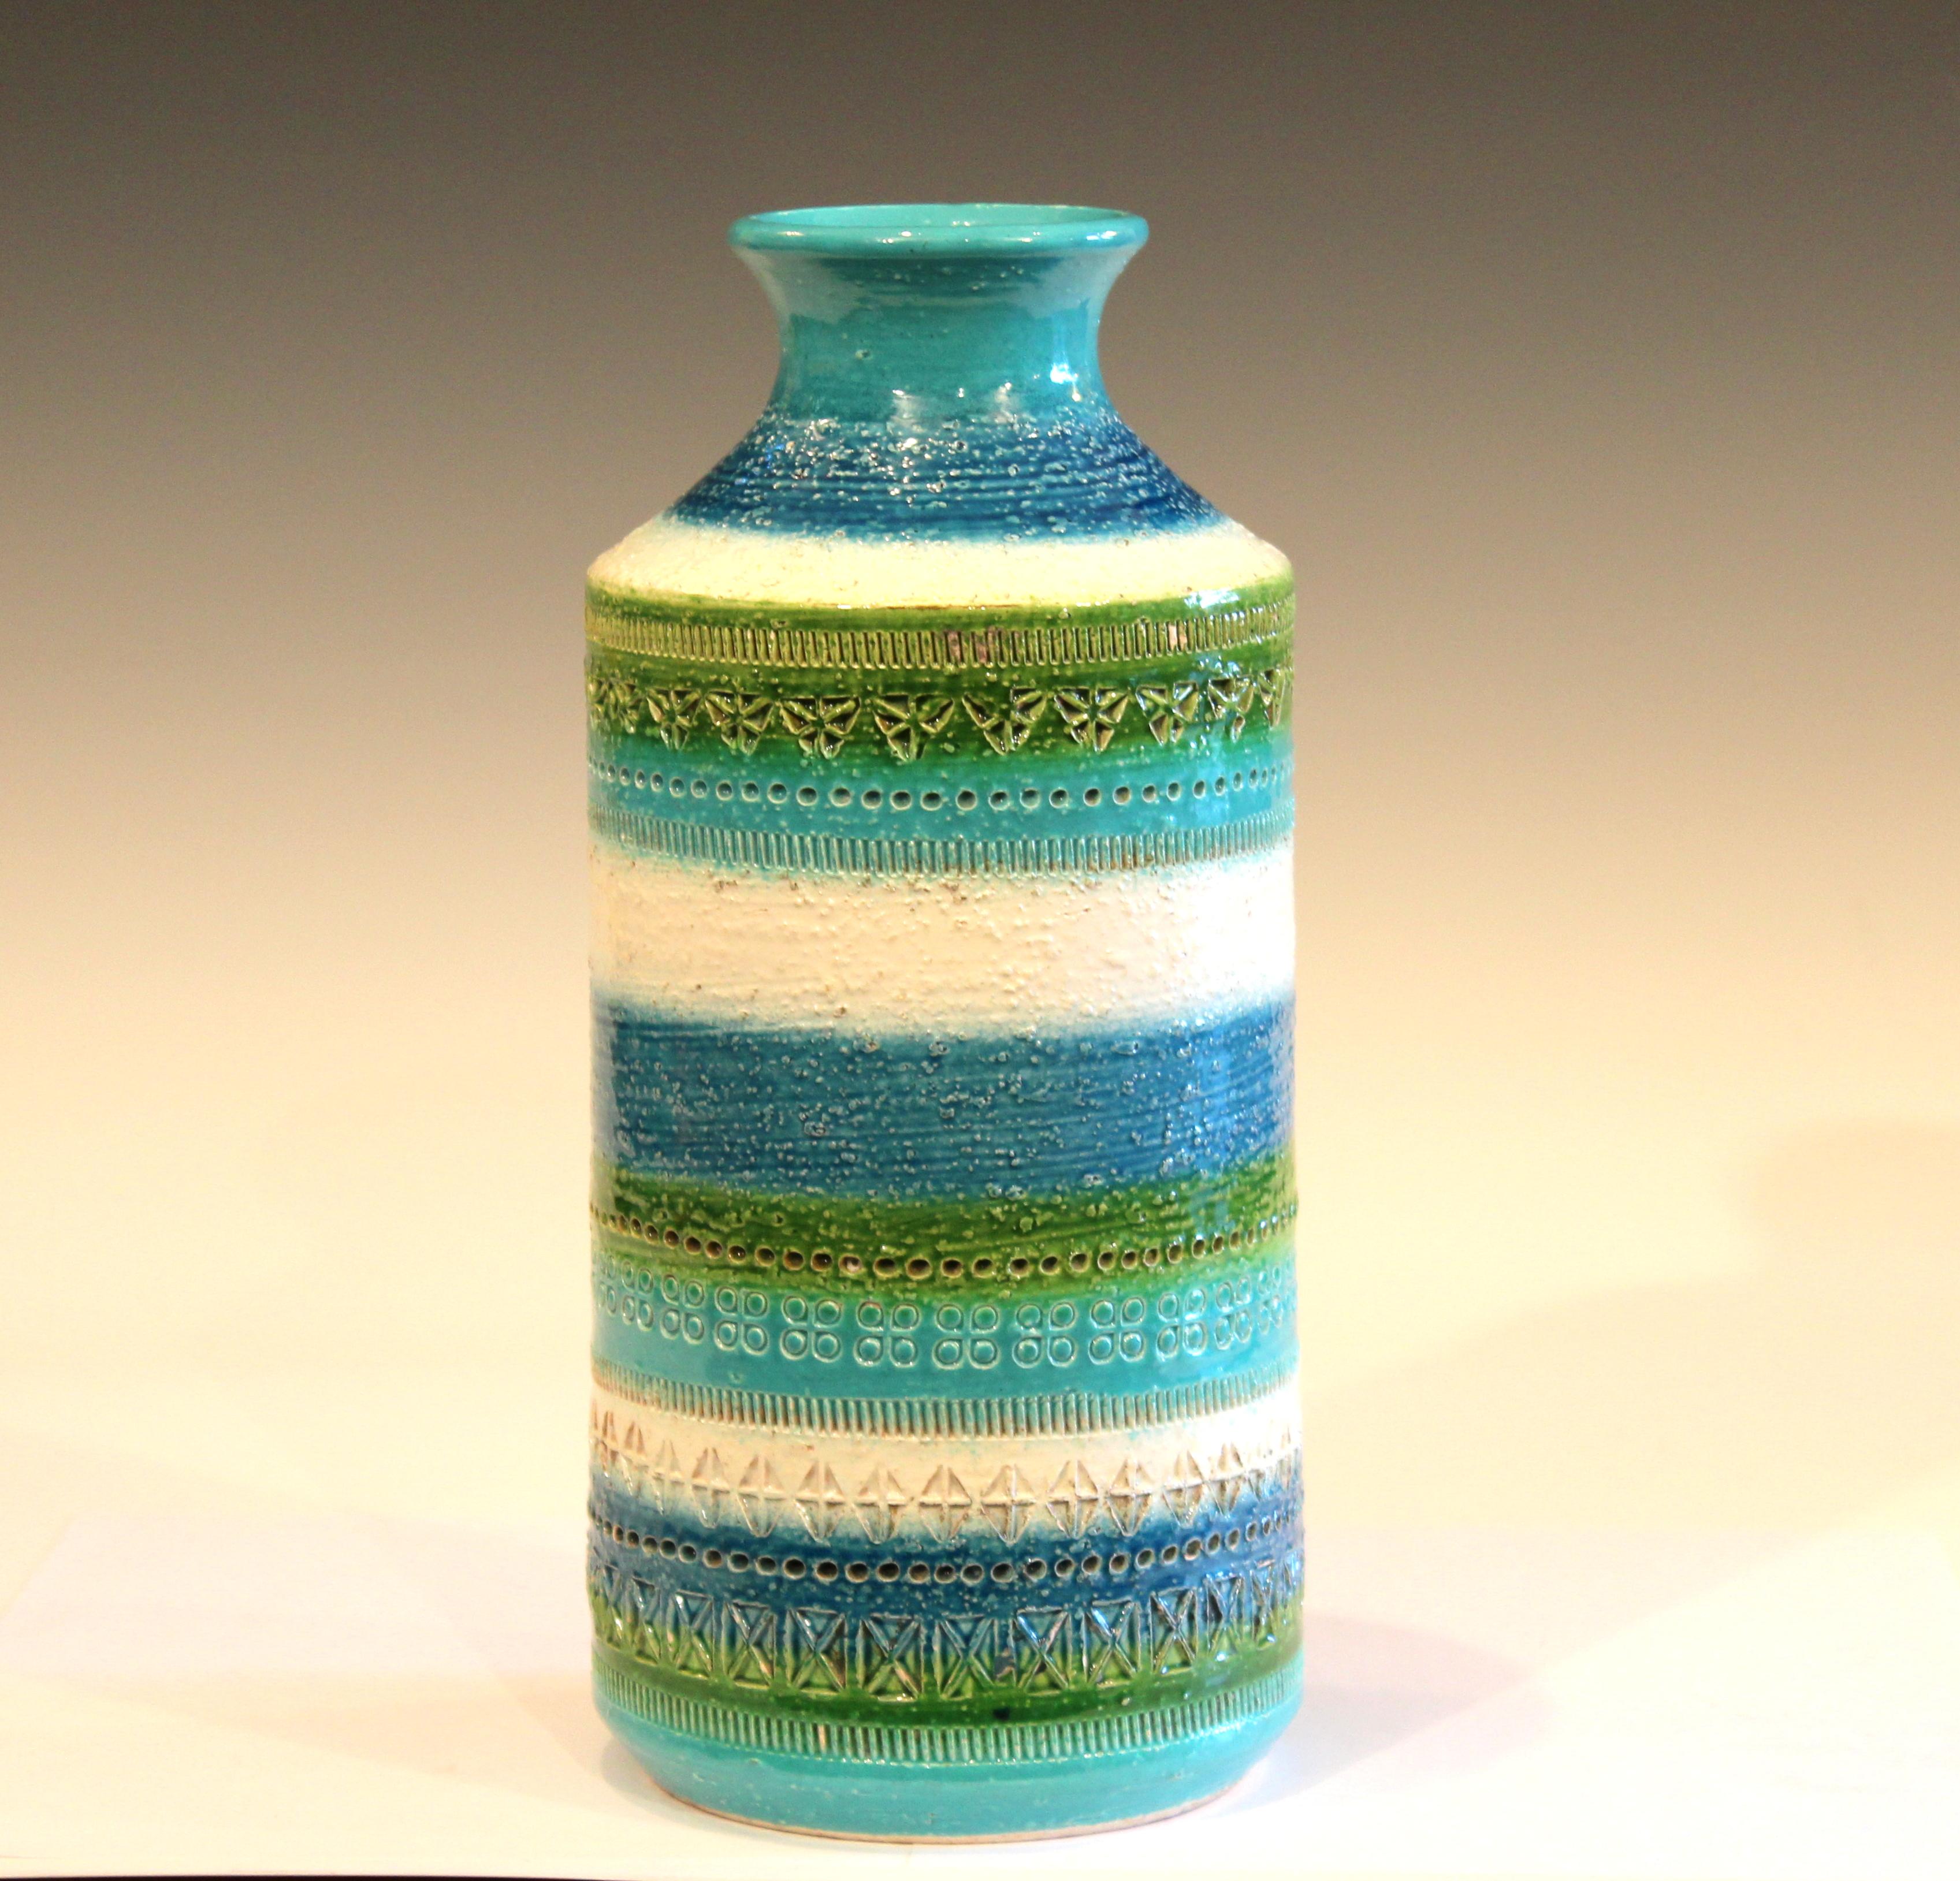 Vintage Bitossi vase decorated with blue and green colored rimini bands, circa 1960s. 12